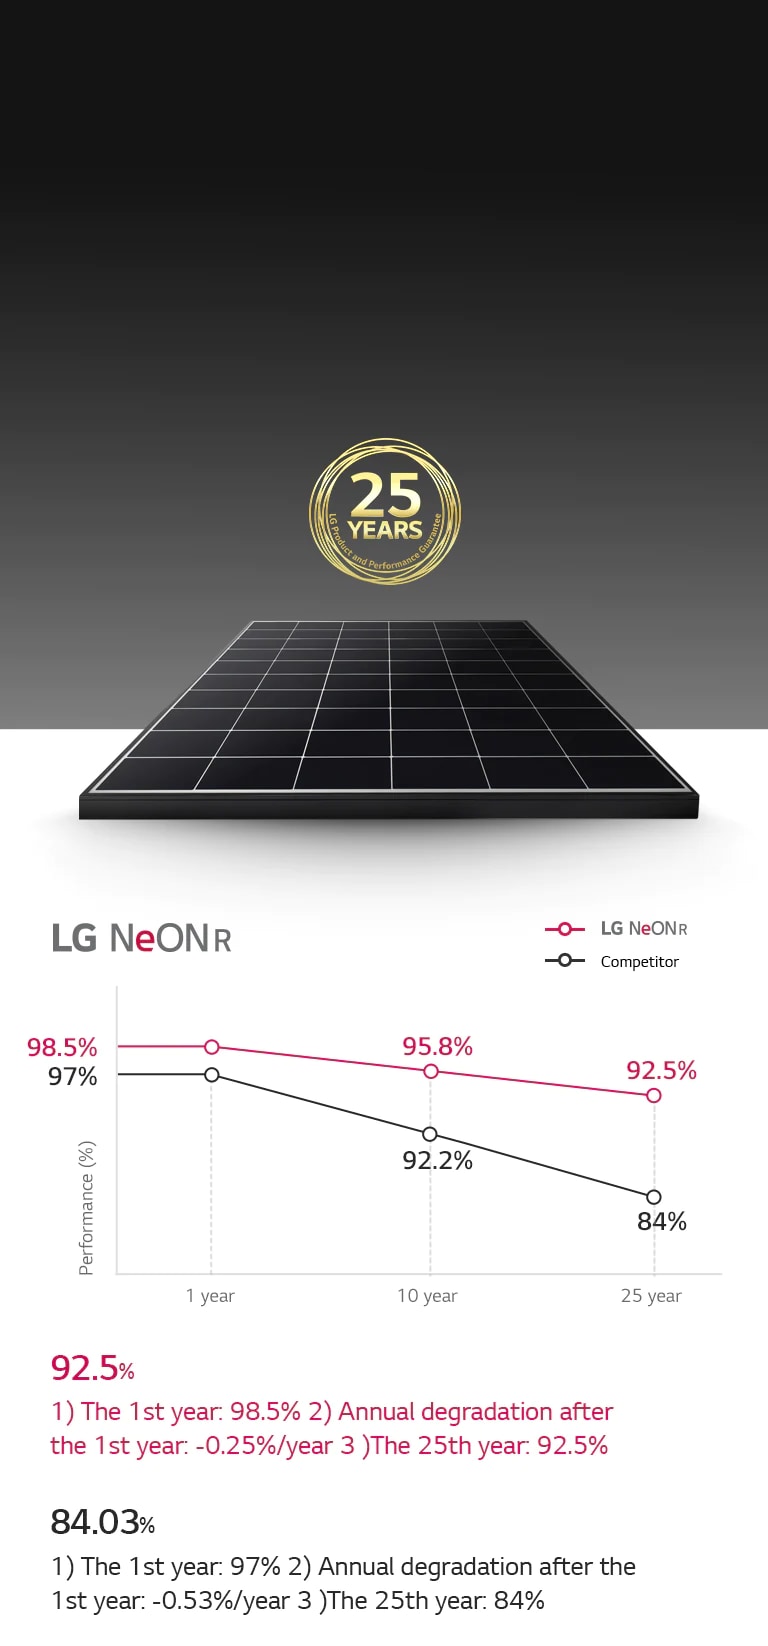 Graphs and images showing long-lasting clean energy production with a 25-year product and performance warranty